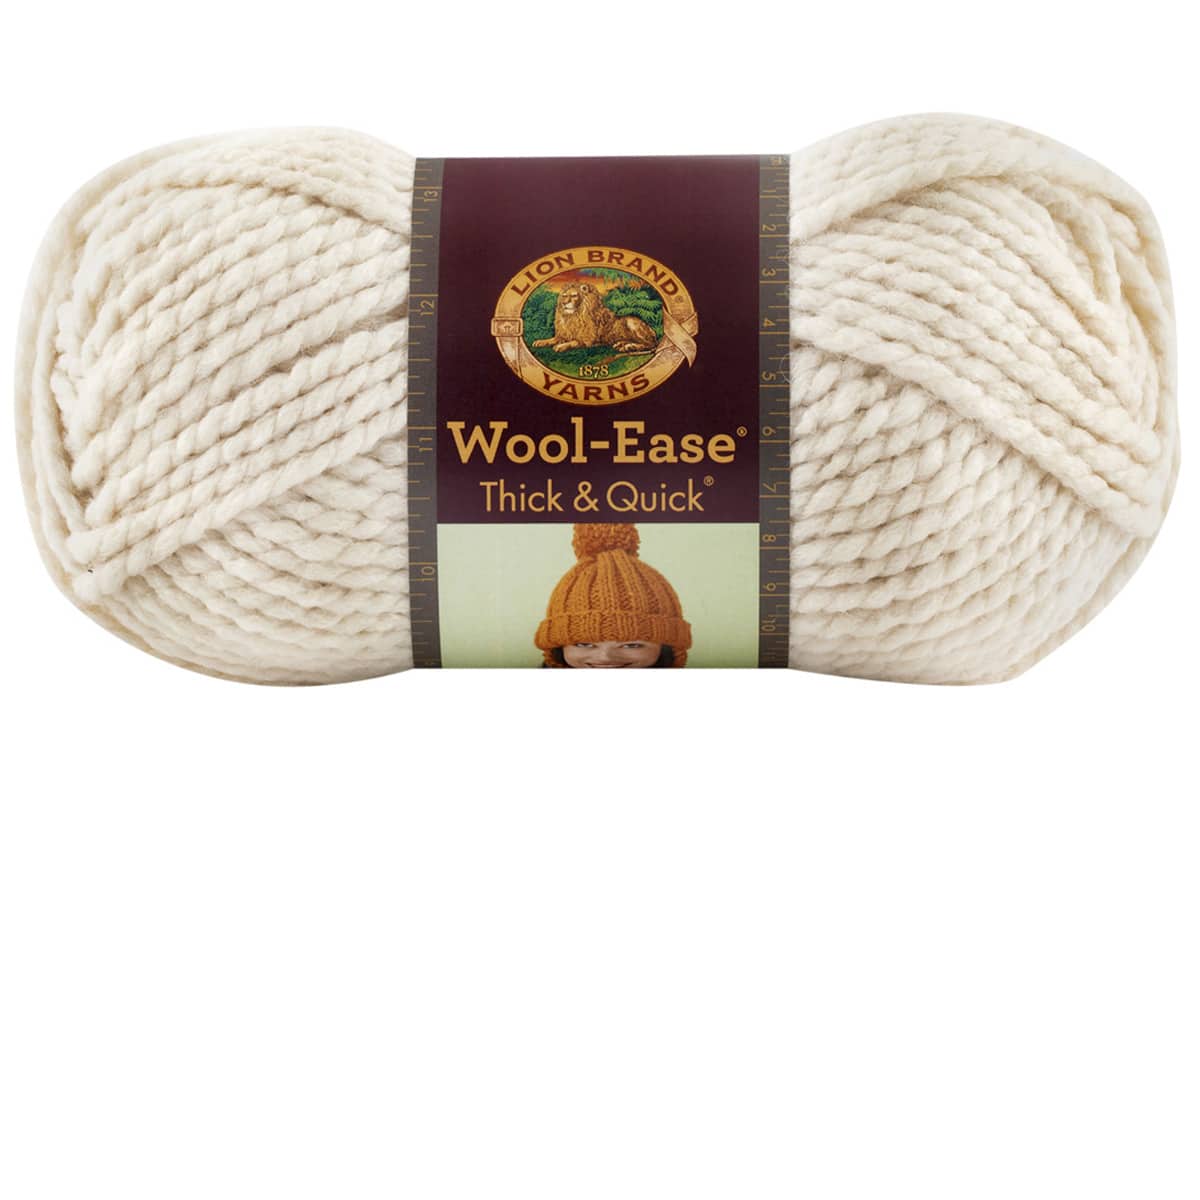 Lion Brand Wool-Ease Thick & Quick Yarn-Coney Island, 1 count - Kroger